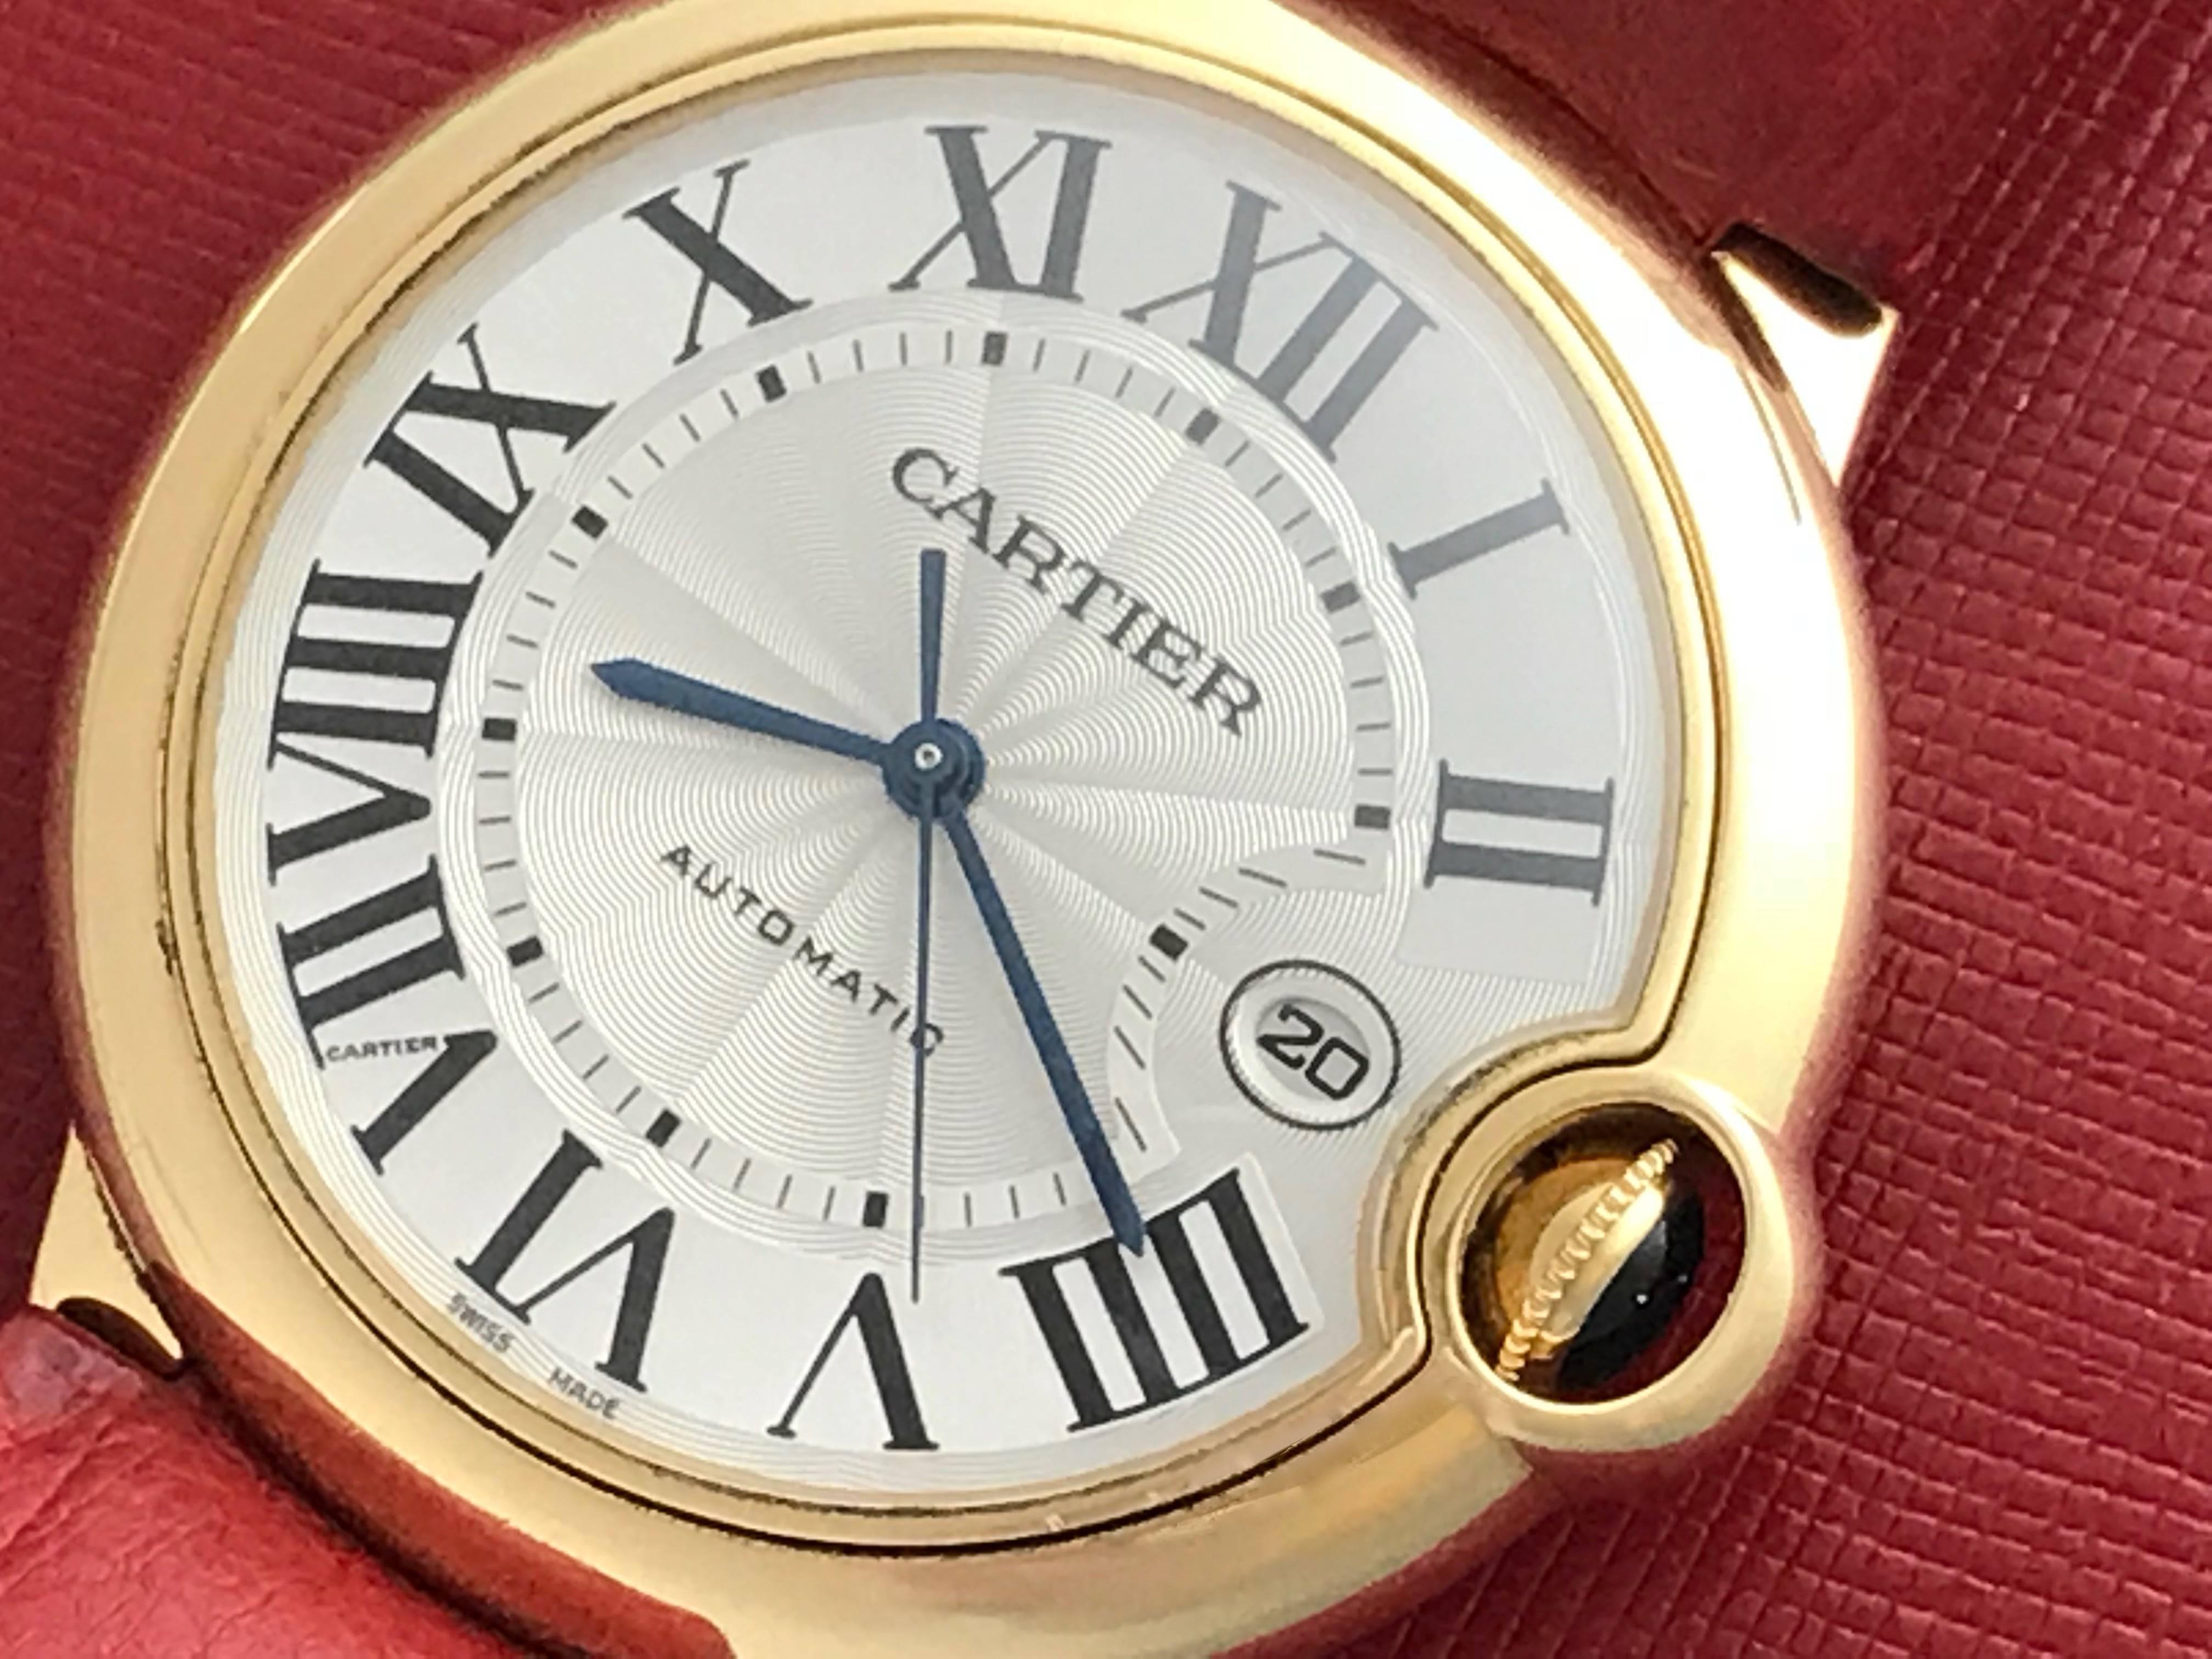 Cartier 18k Yellow Gold Ballon Bleu Automatic Men's Wrist Watch. Model W6900551. Silvered guilloche Dial with black Roman numerals, large 18k Yellow Gold round style case (42mm). Red ostrich strap with 18k Yellow Gold Cartier deployant clasp.